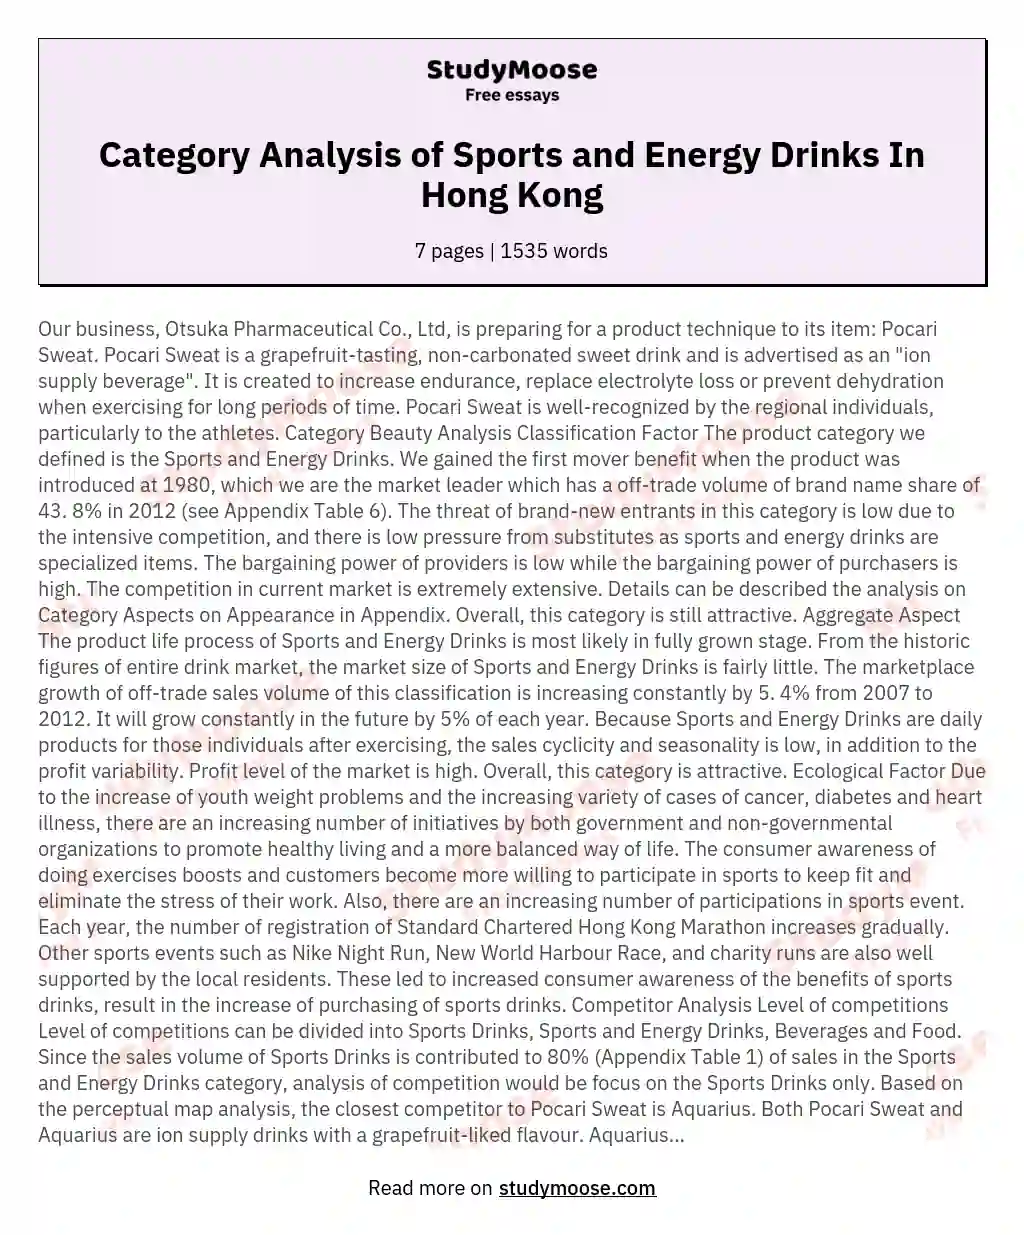 Category Analysis of Sports and Energy Drinks In Hong Kong